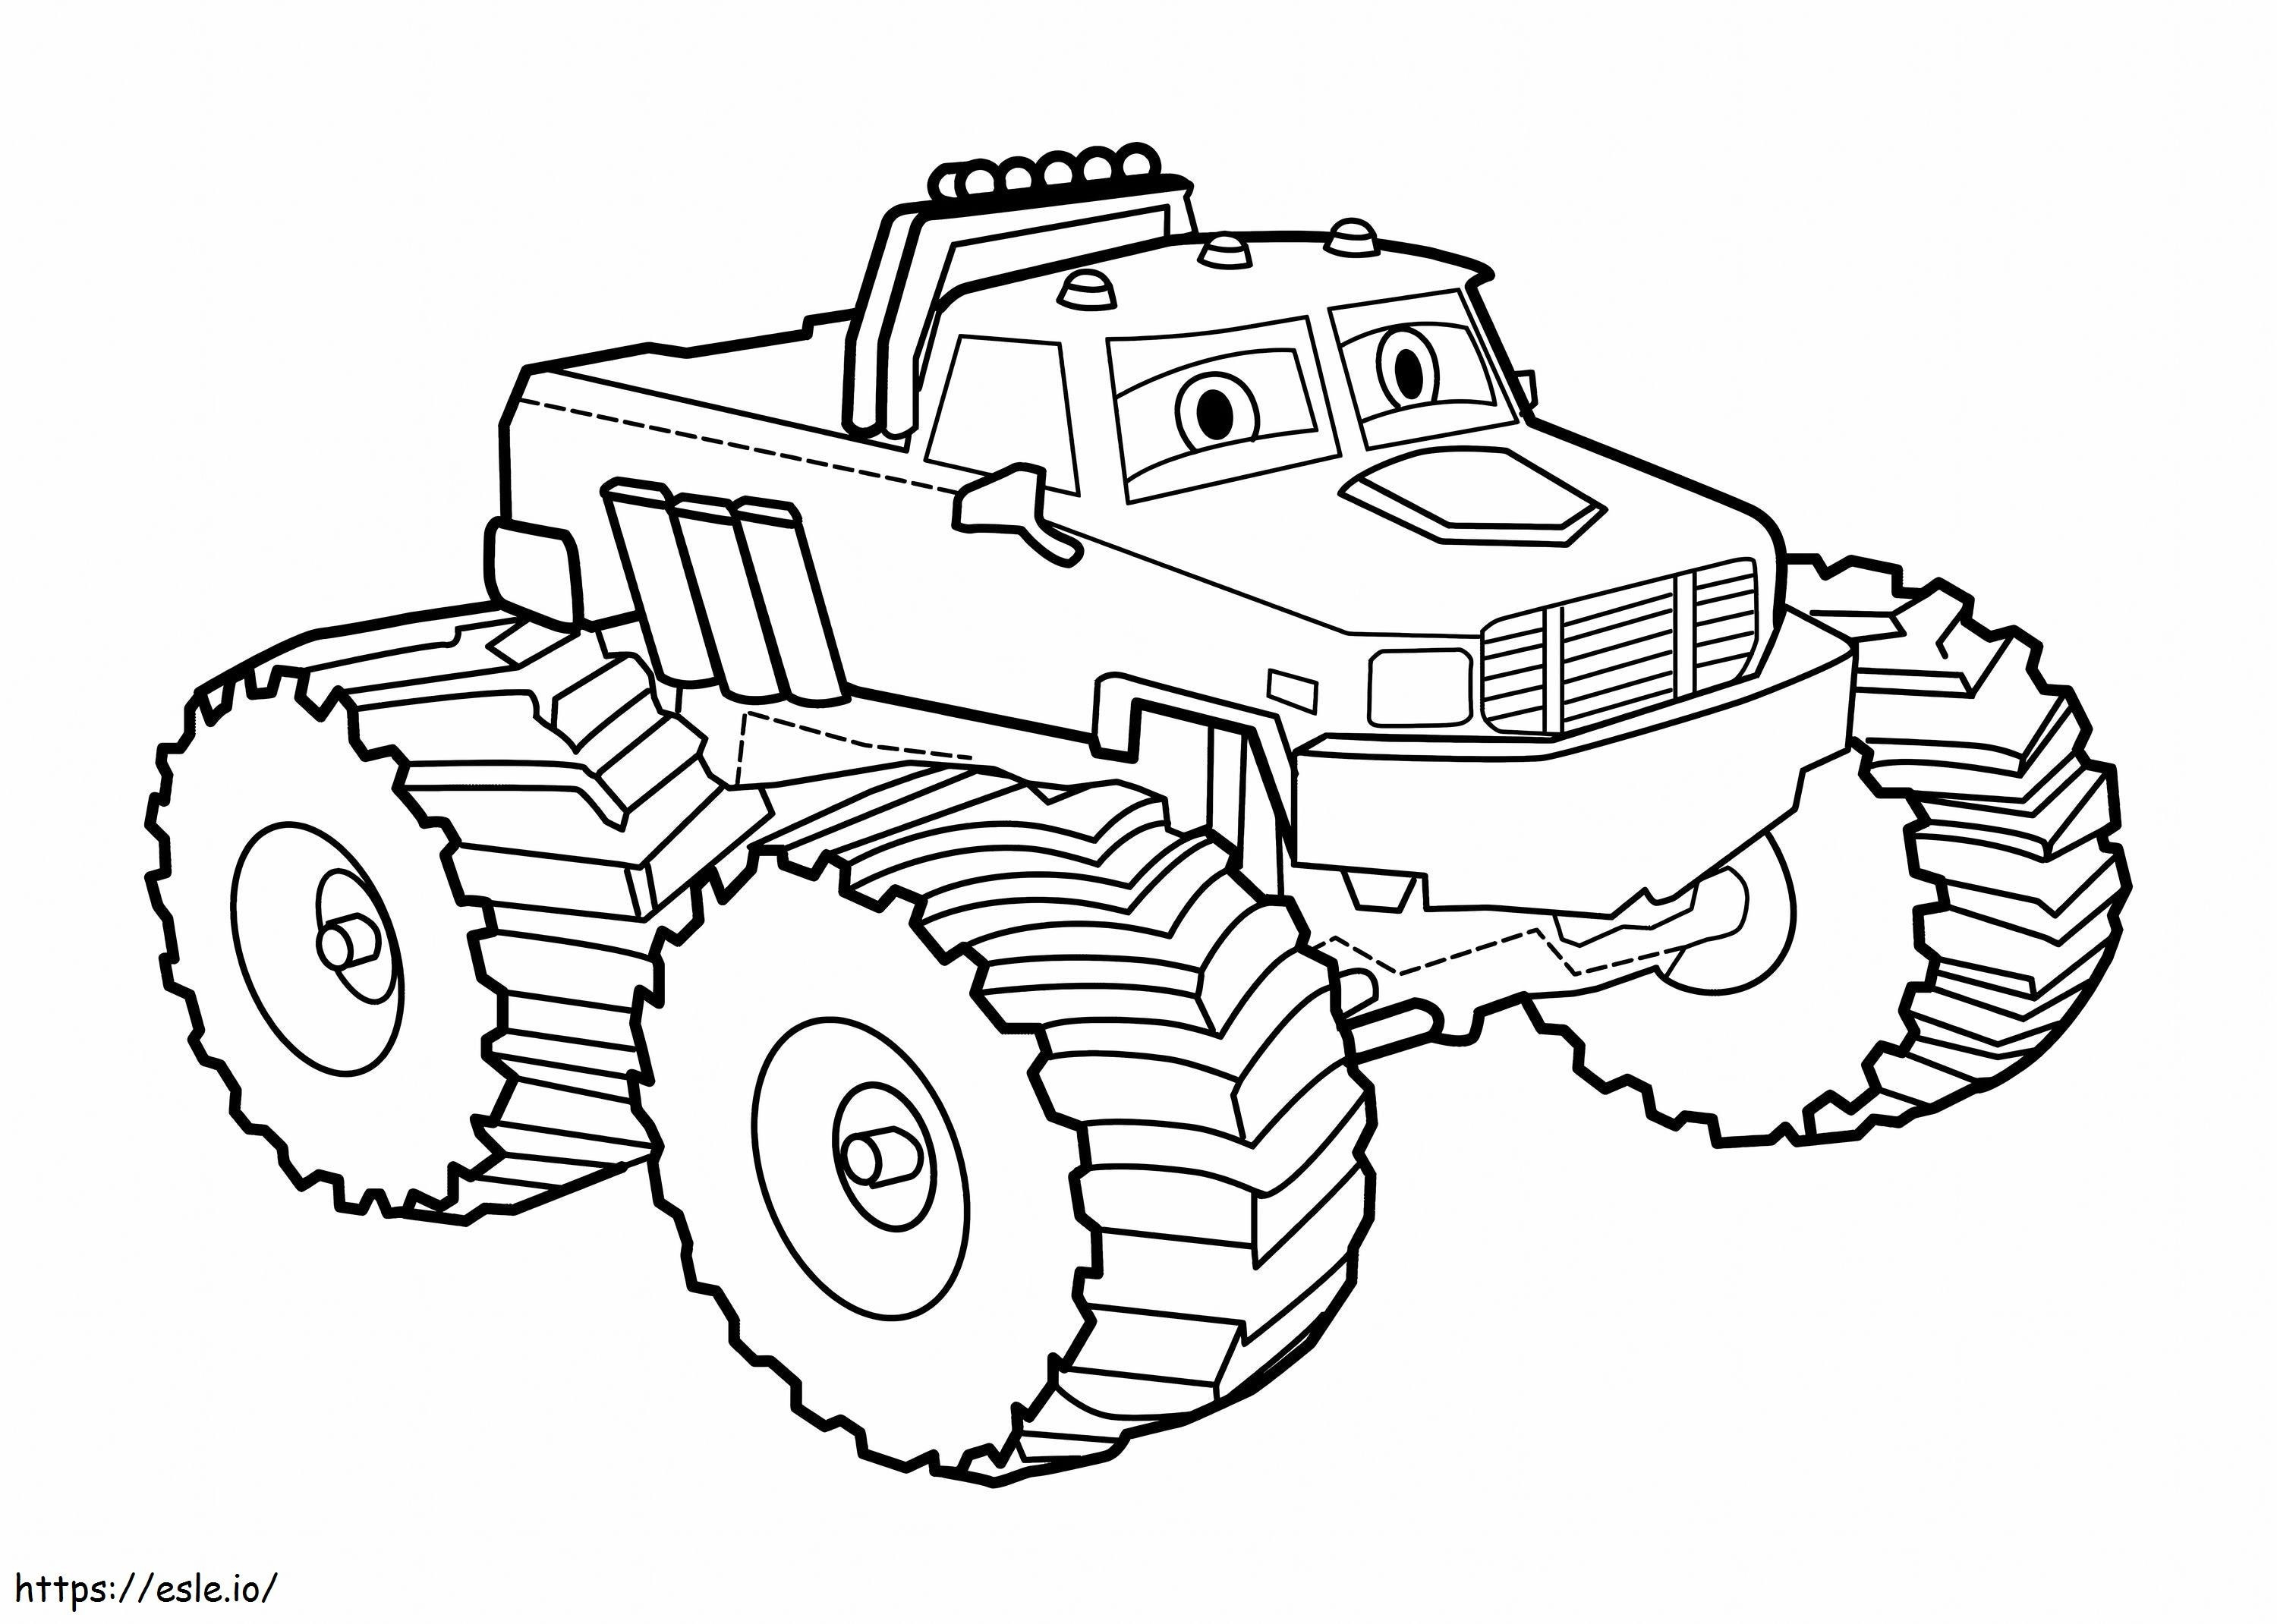 Cars Drawings Coloring New Tow Mater Free Best Cartoon Cars Art Drawings Of Cars Drawings Coloring coloring page